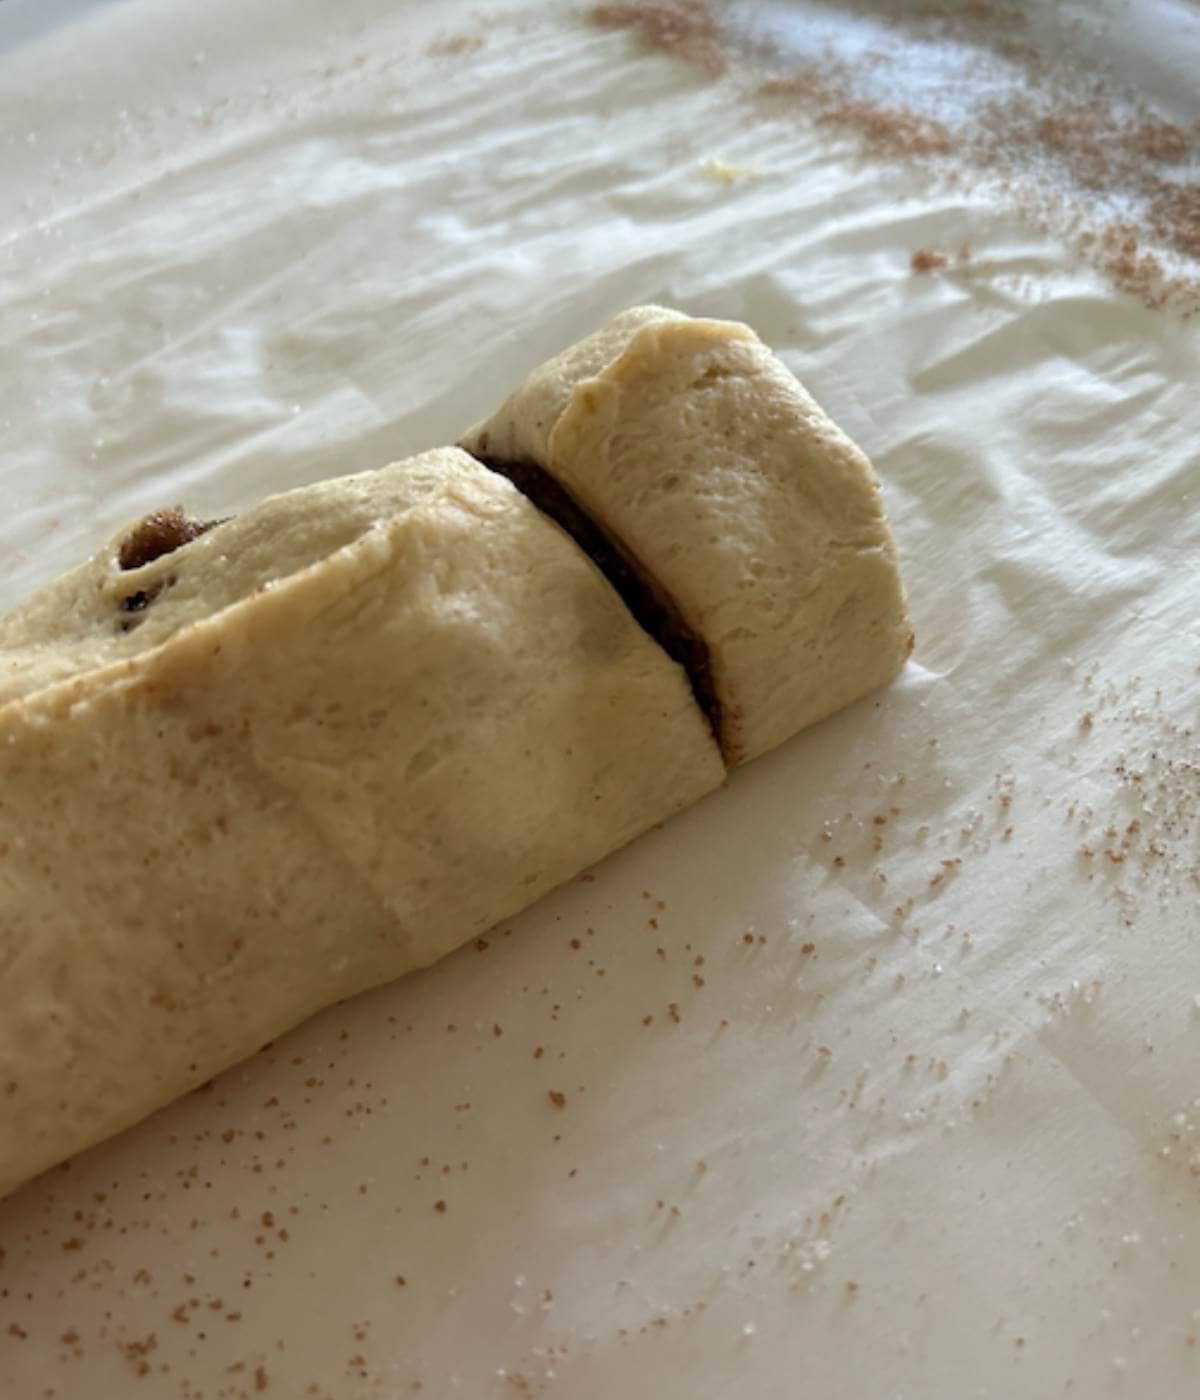 Sliced cinnamon roll on parchment paper.